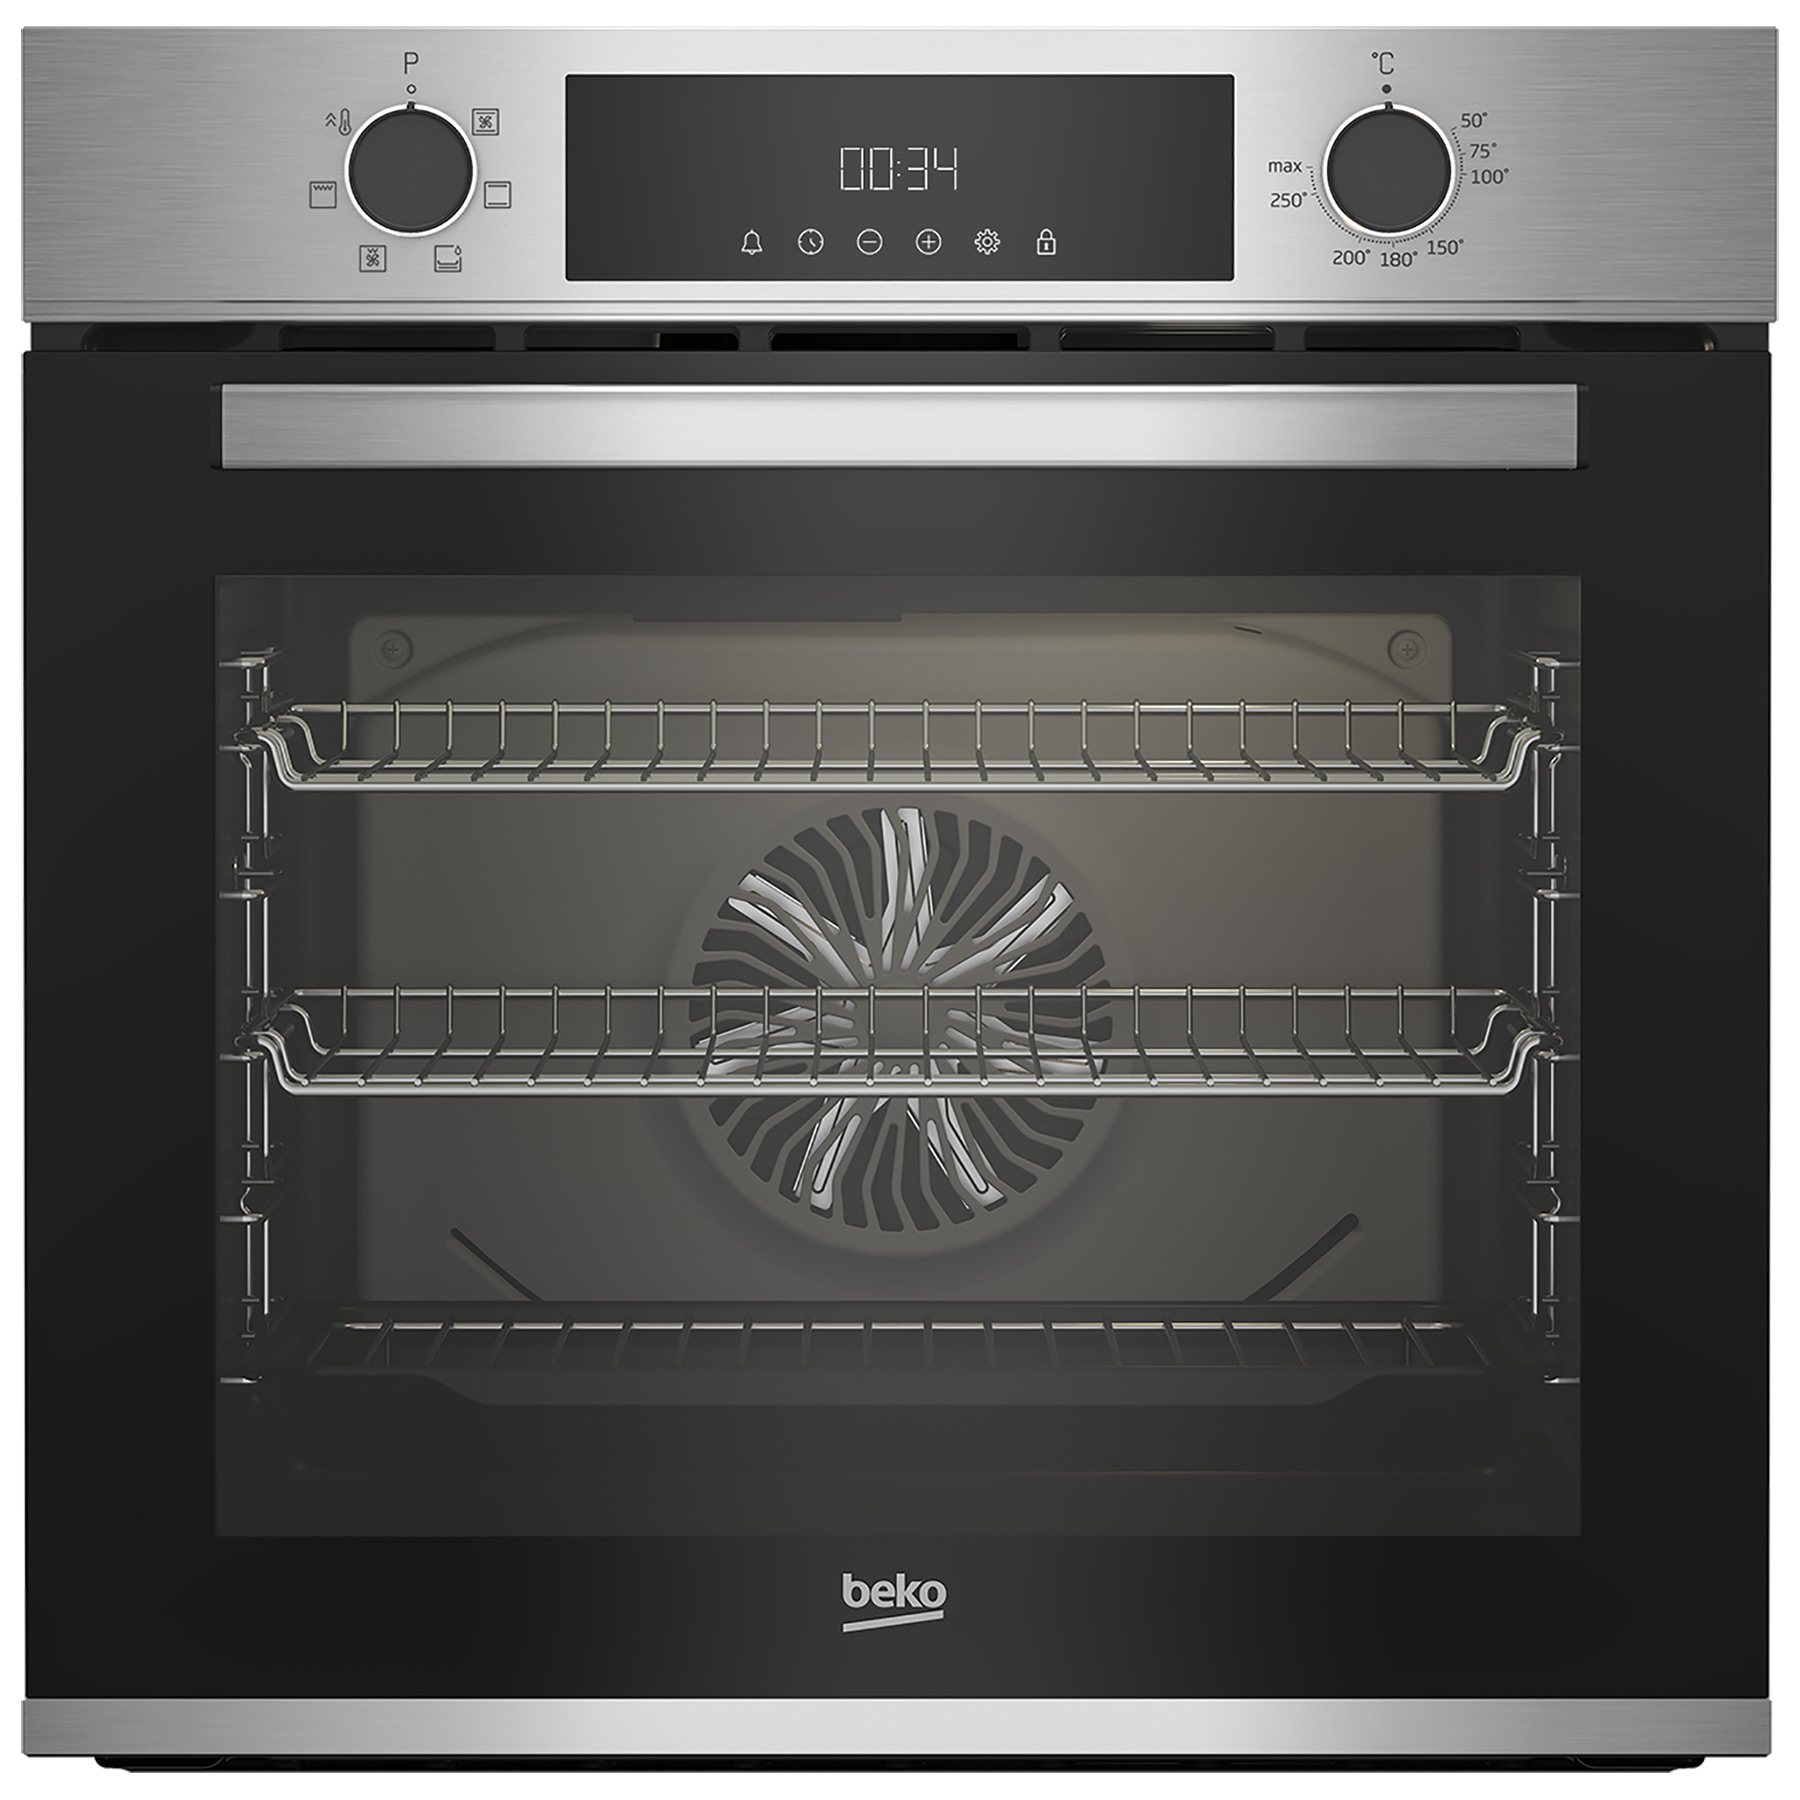 Beko CIMY91X Built In Electric Single Oven in St Steel 73L A Rated